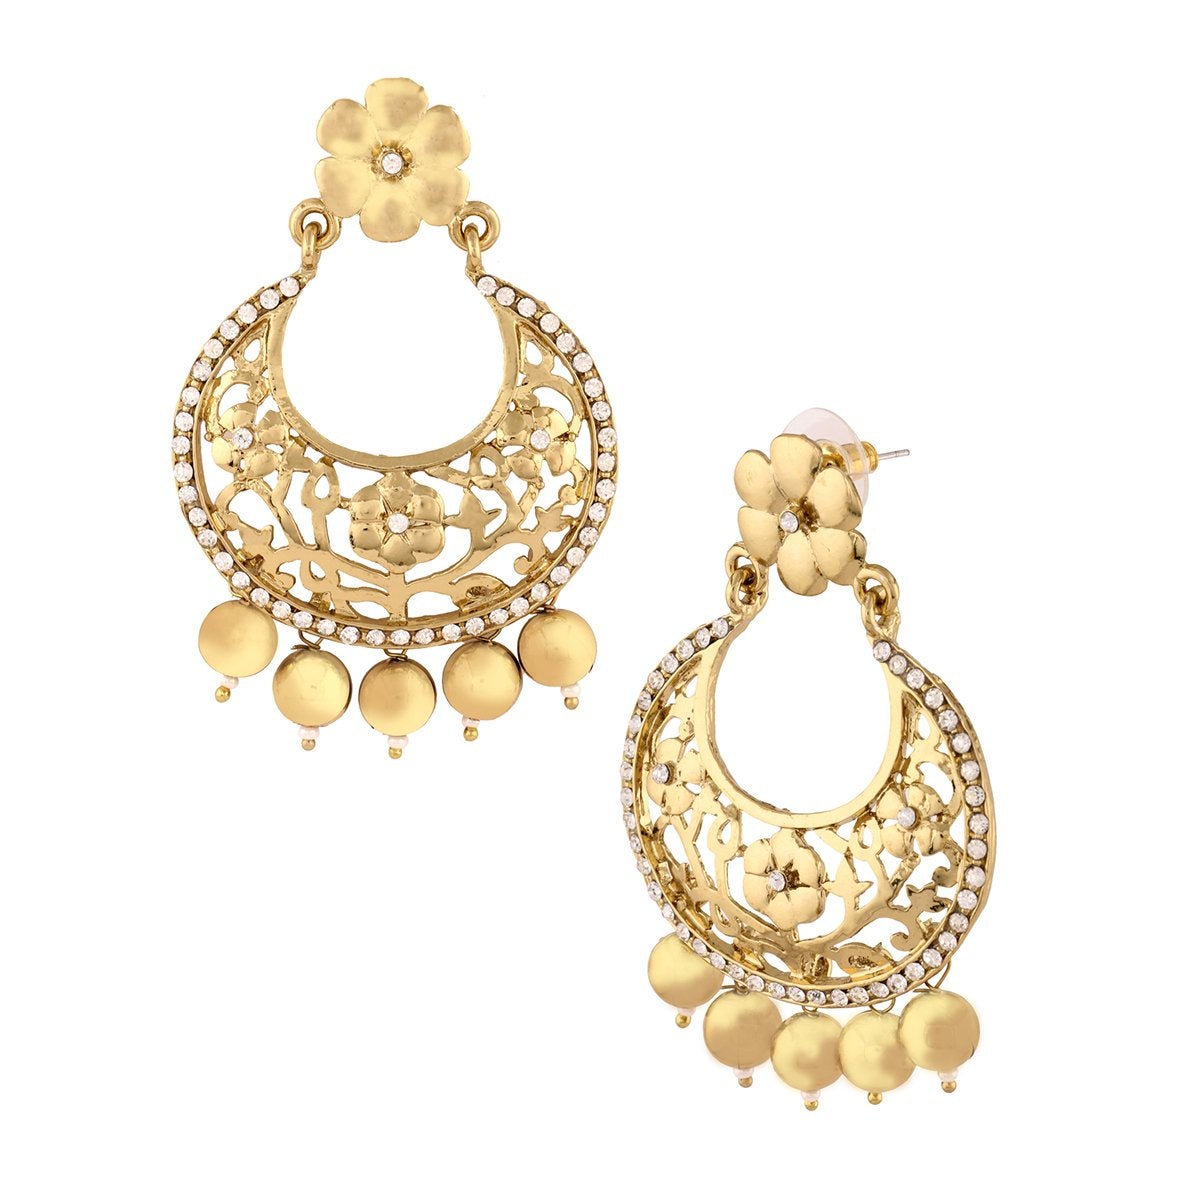 Antique Gold Plated Floral Large Chaand Bali Earring For Women